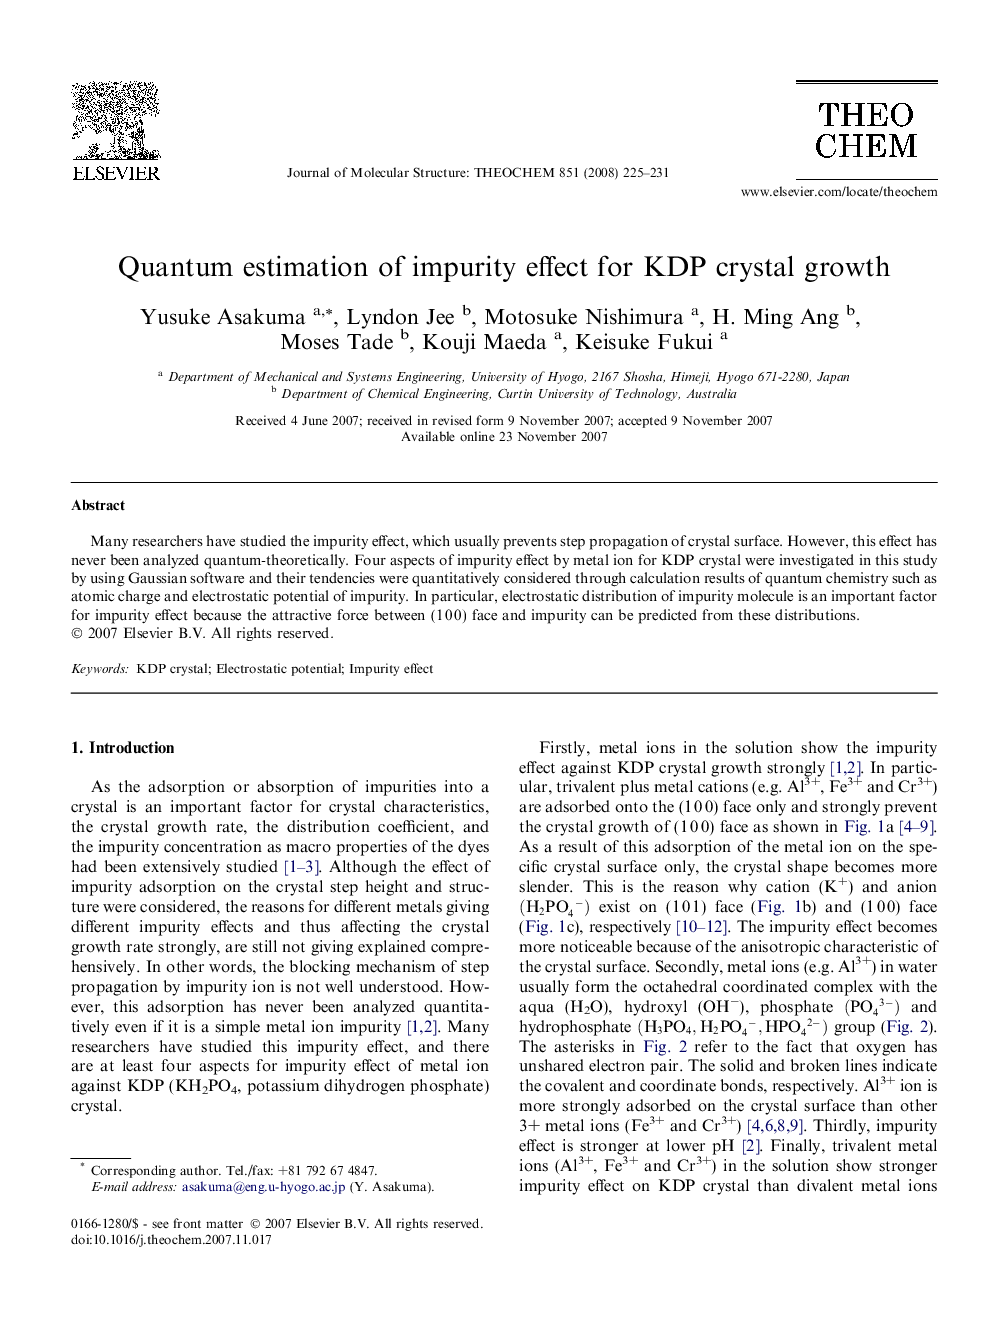 Quantum estimation of impurity effect for KDP crystal growth